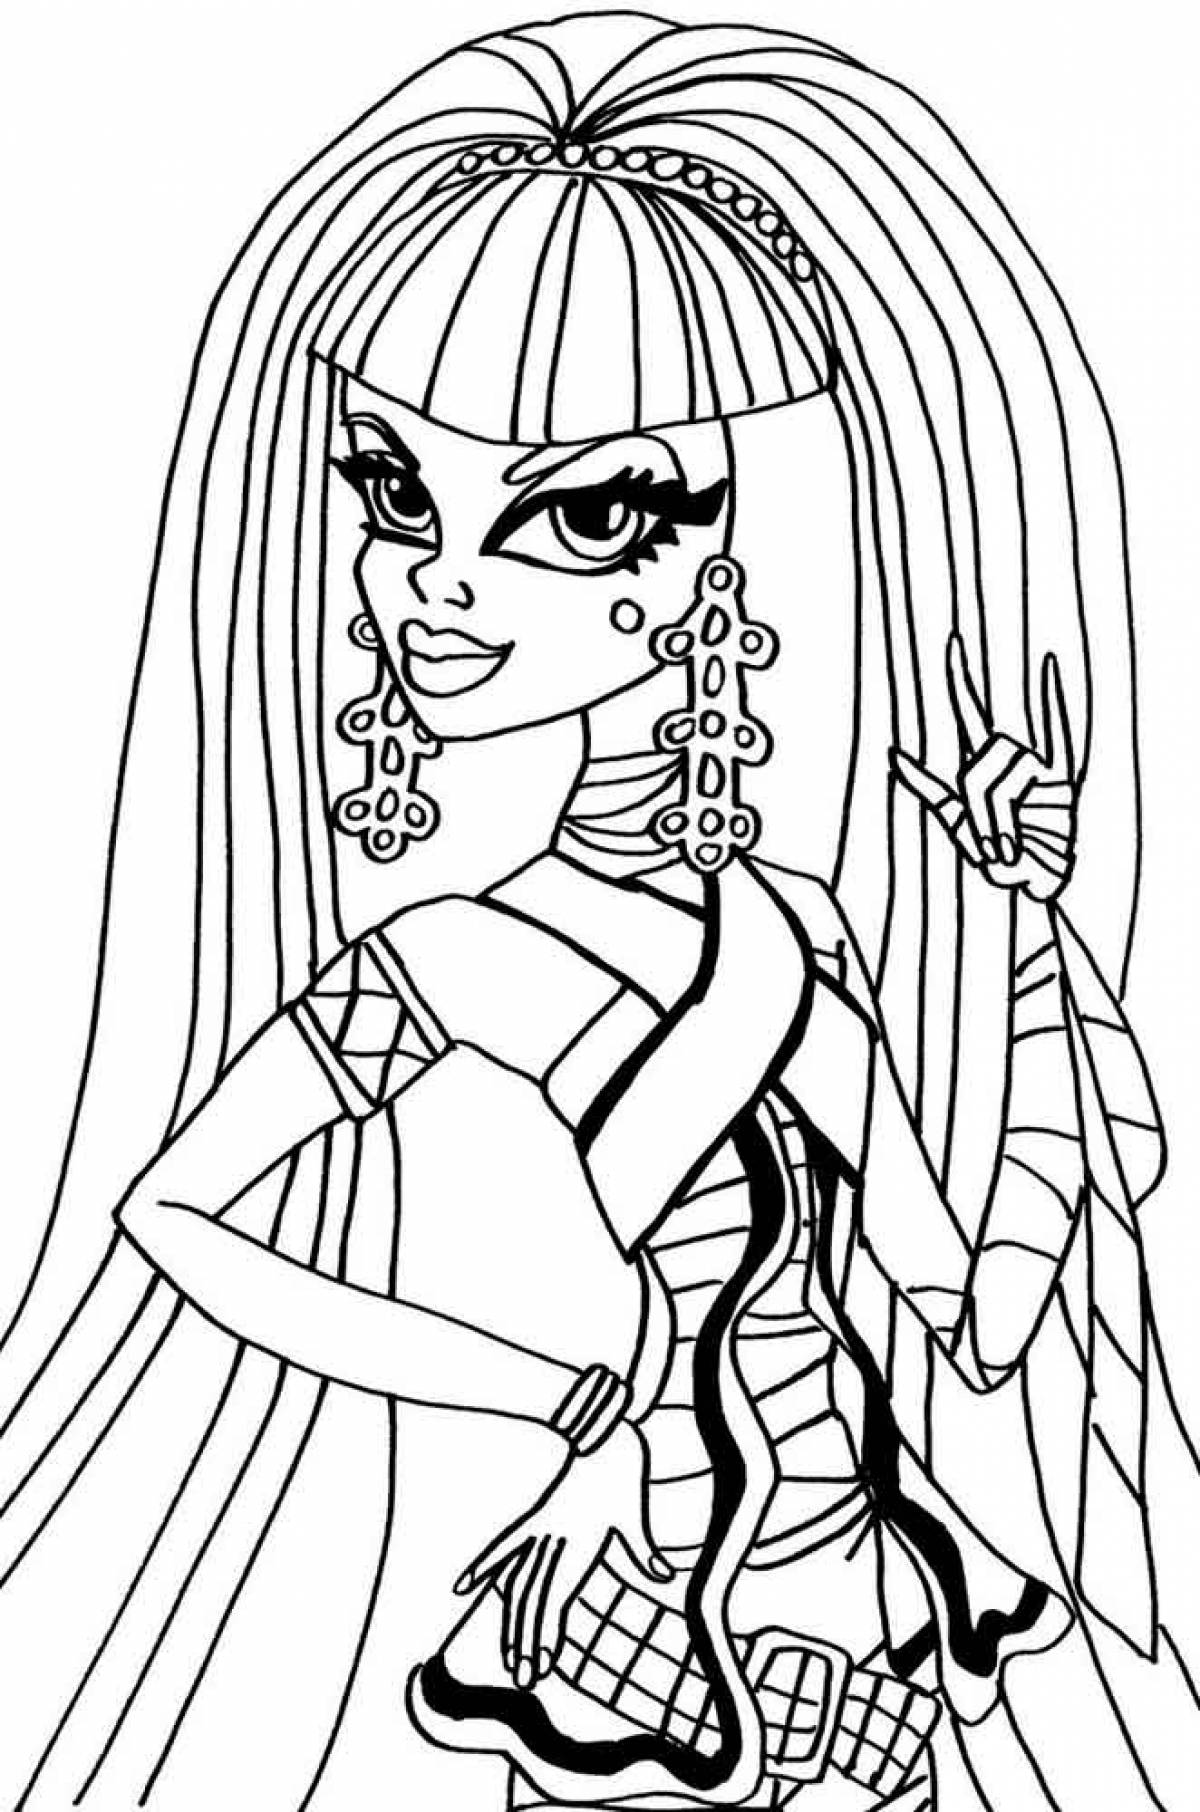 Monster high print coloring page